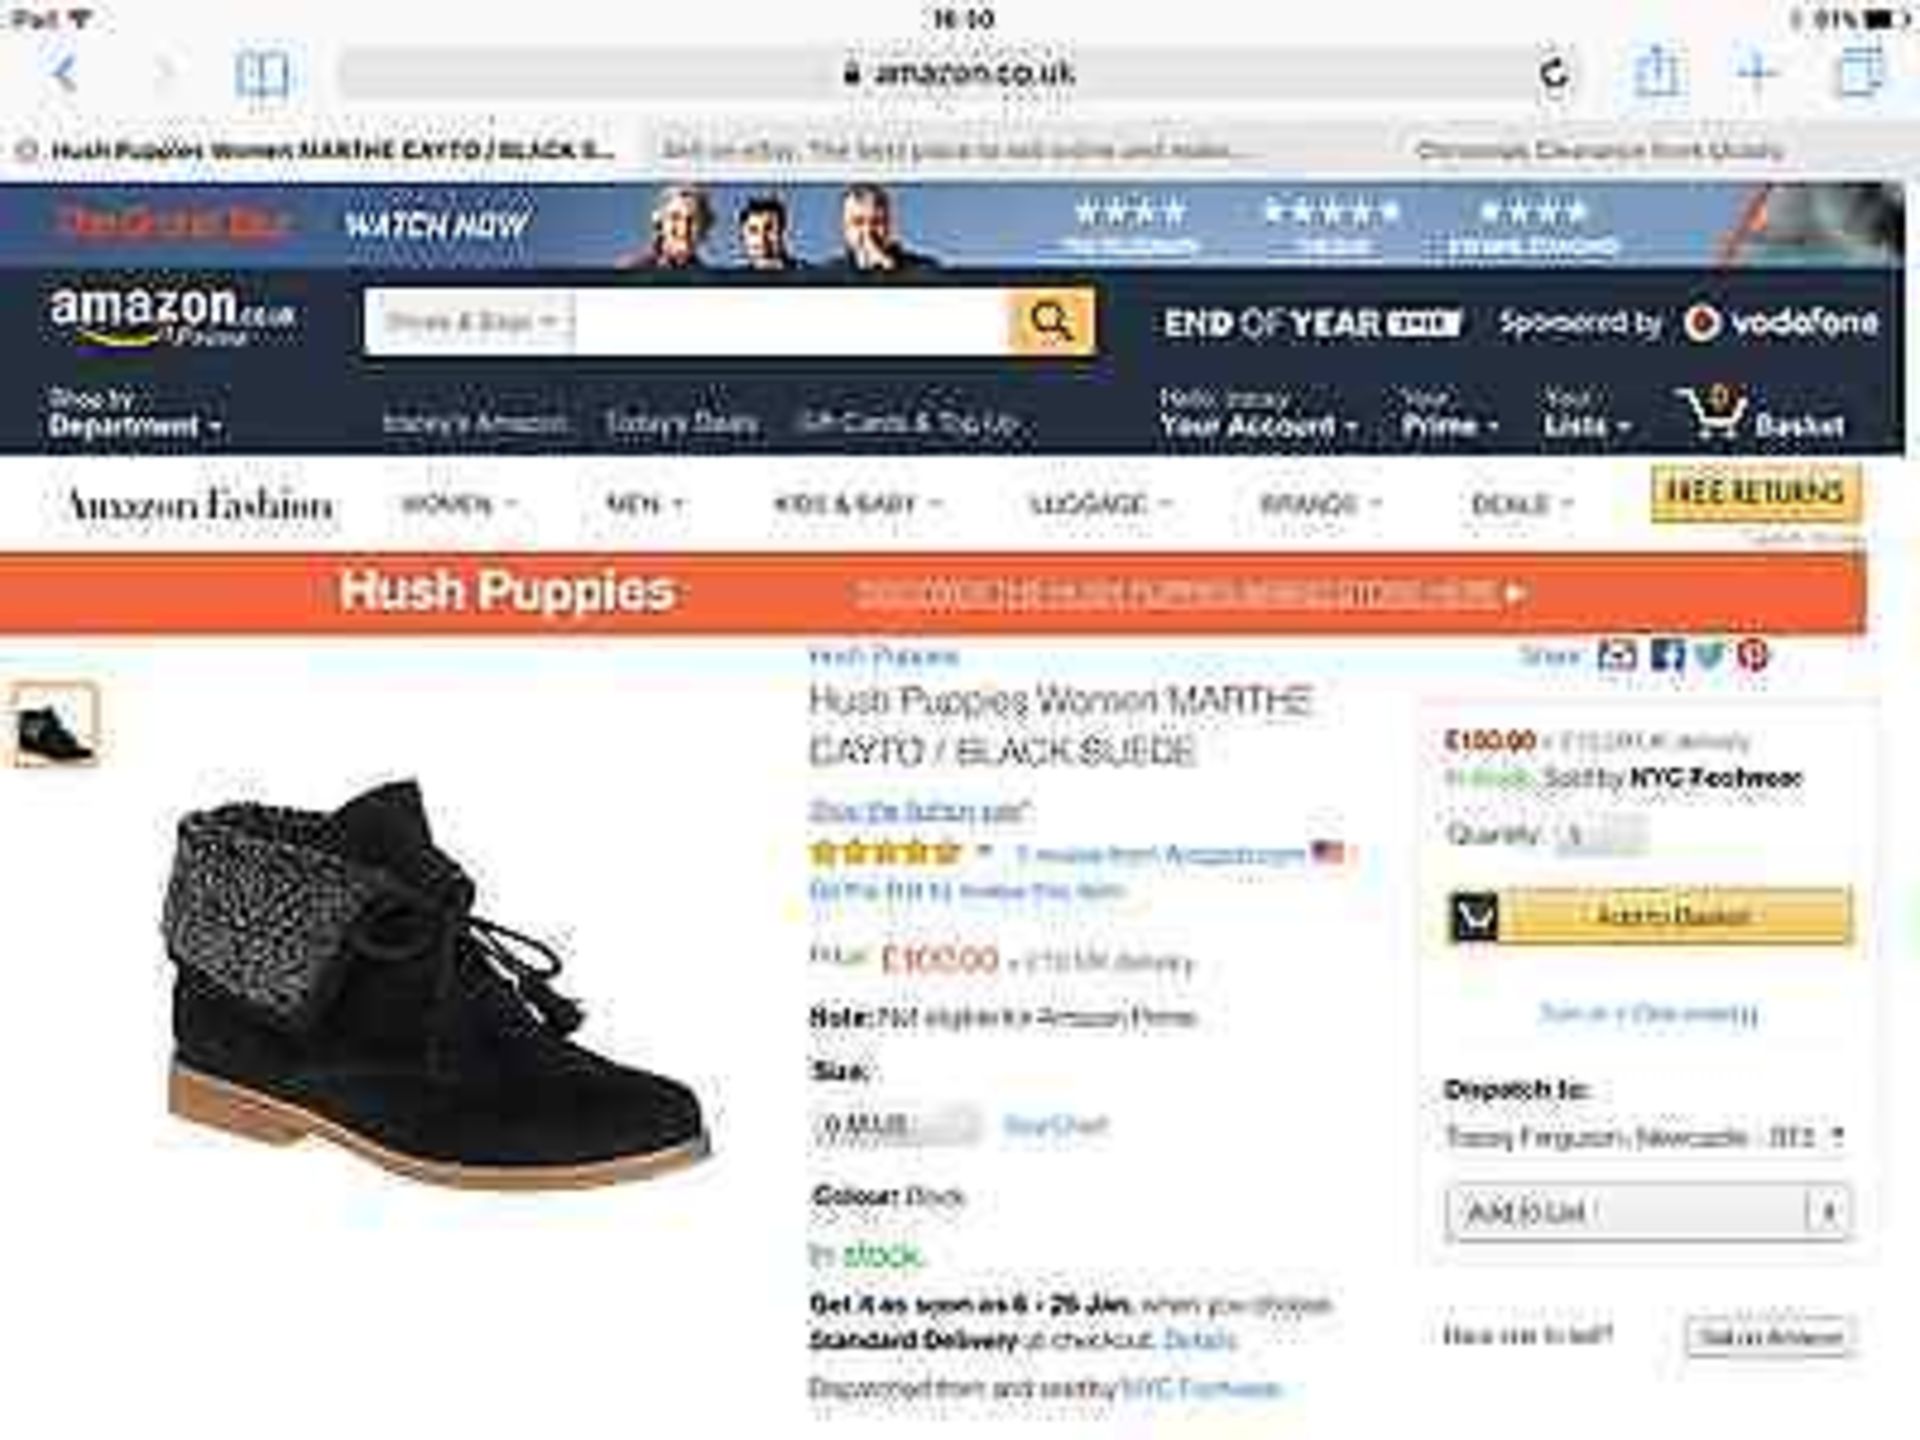 Hush Puppies Black Suede Martha Cayto Ankle Boot, Size UK 7, RRP £100 (New with box) - Image 12 of 12